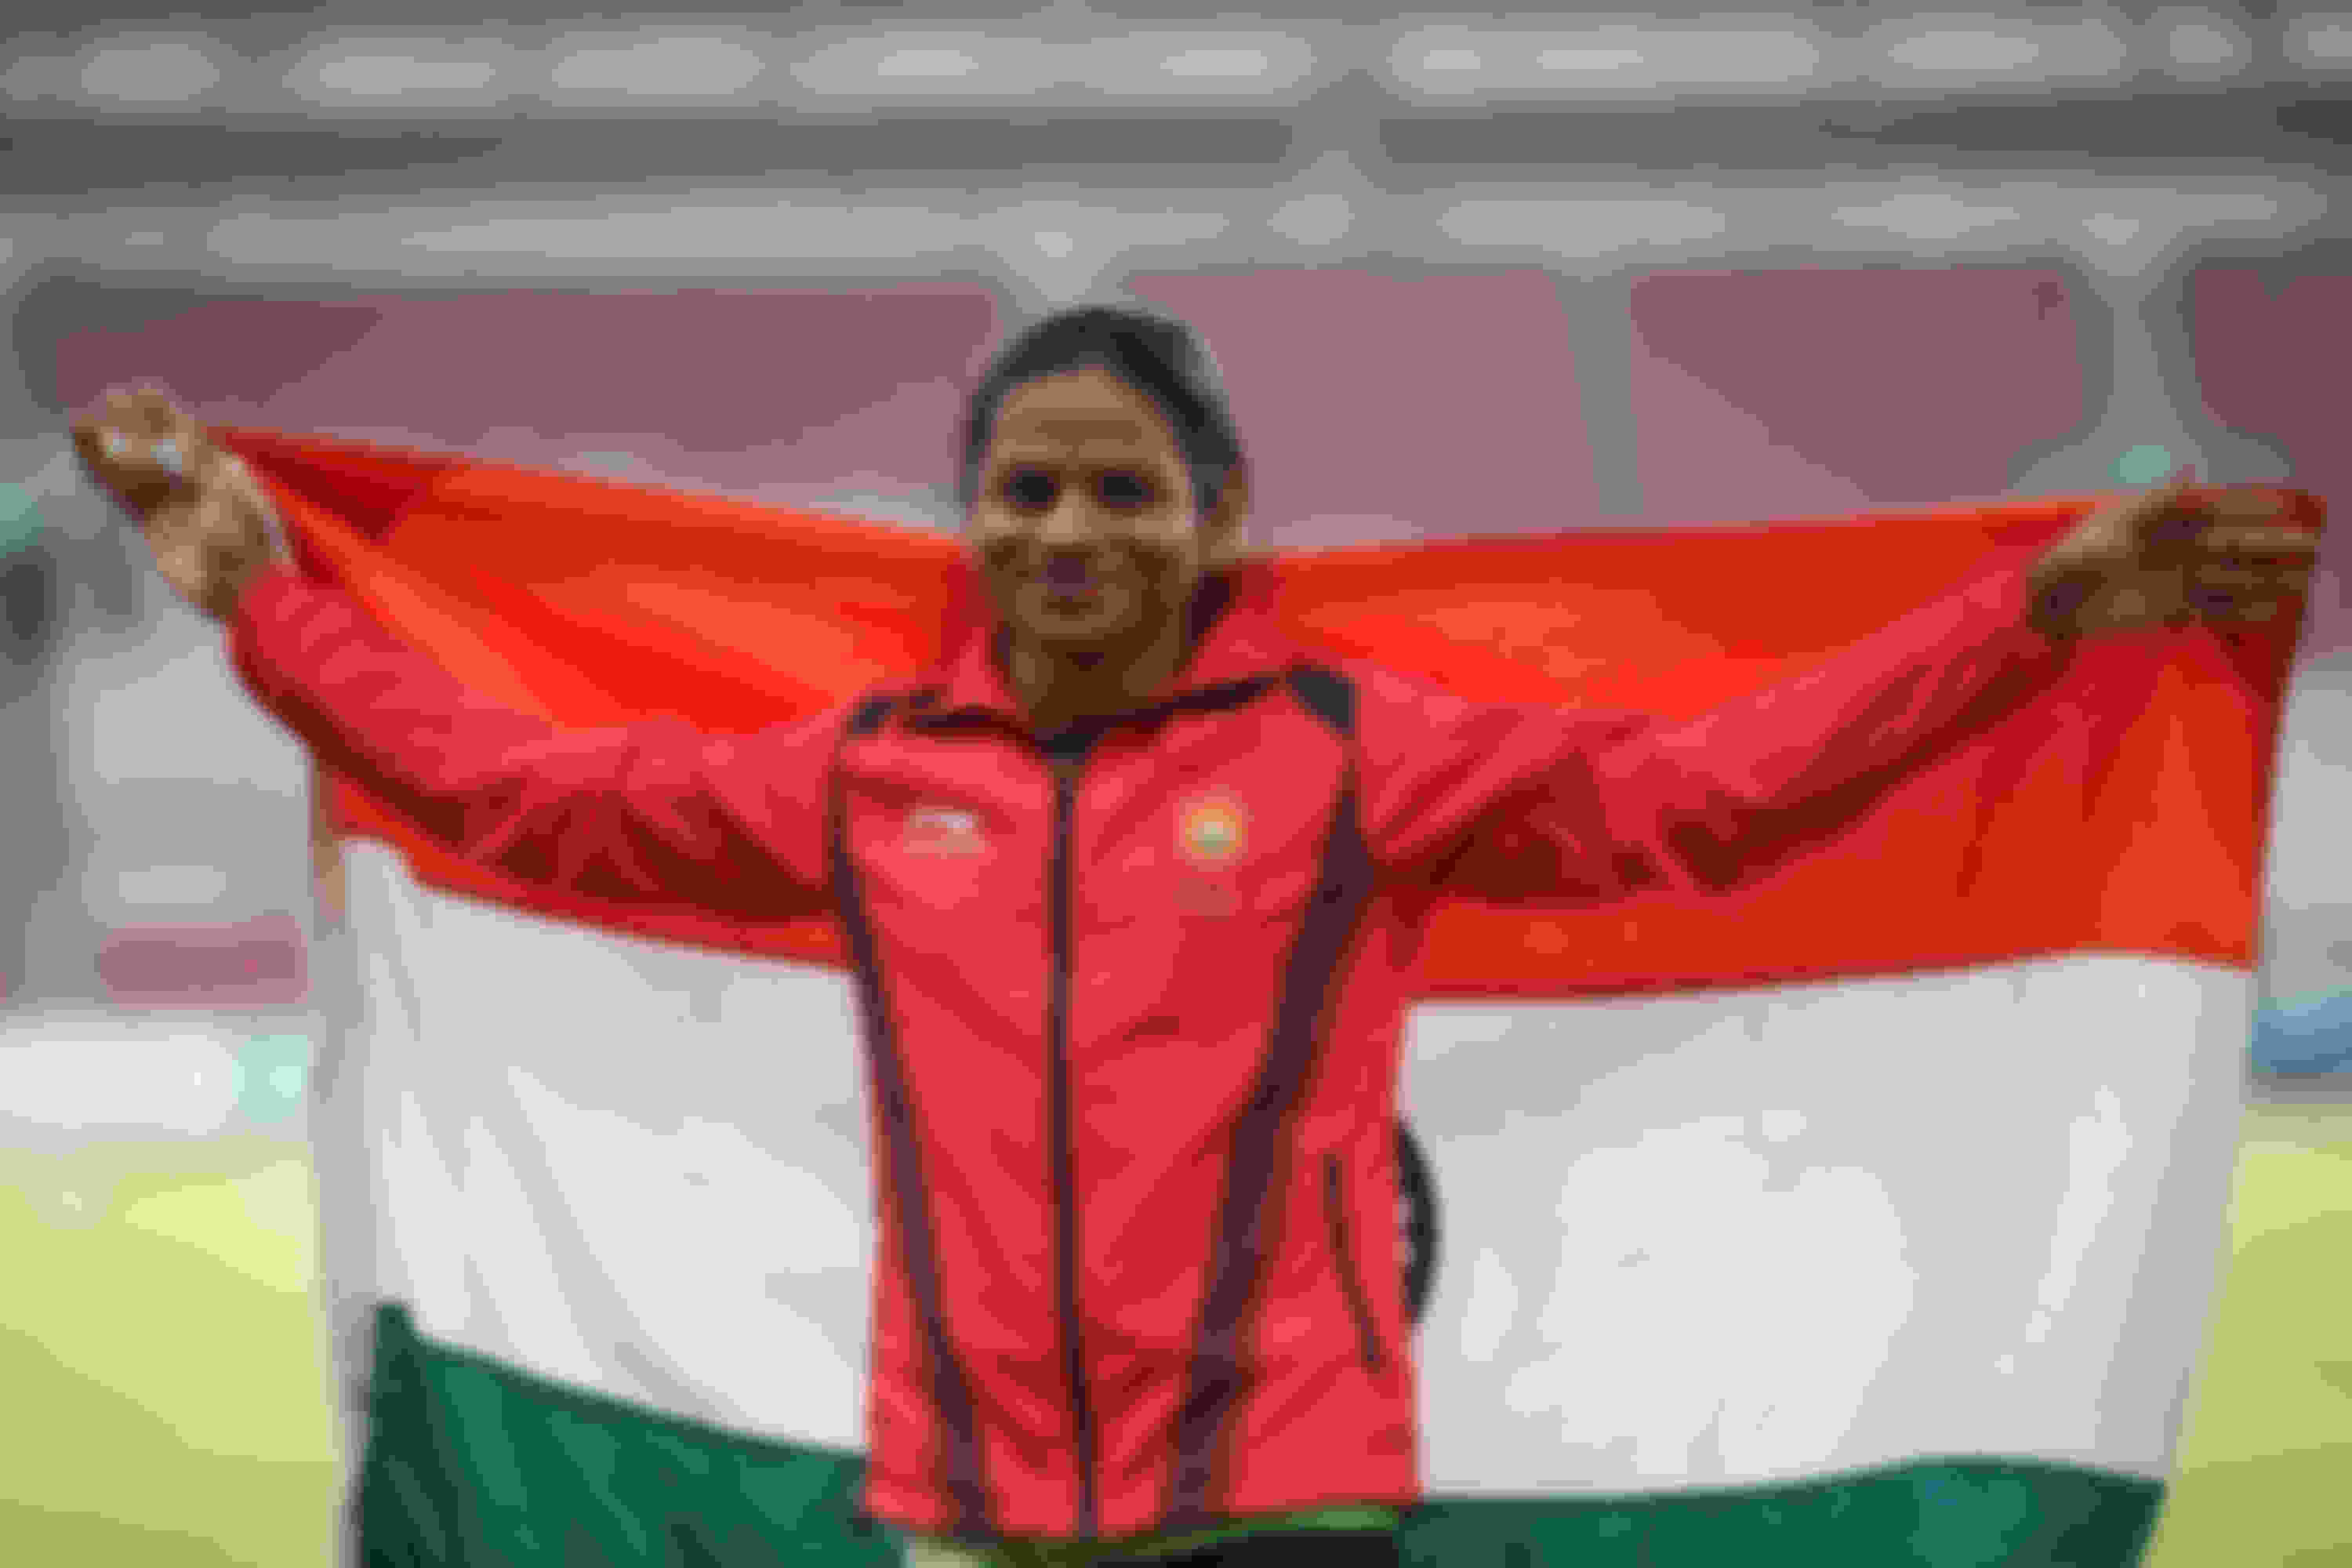 Asian Games medallist Dutee Chand will be in action on Saturday.